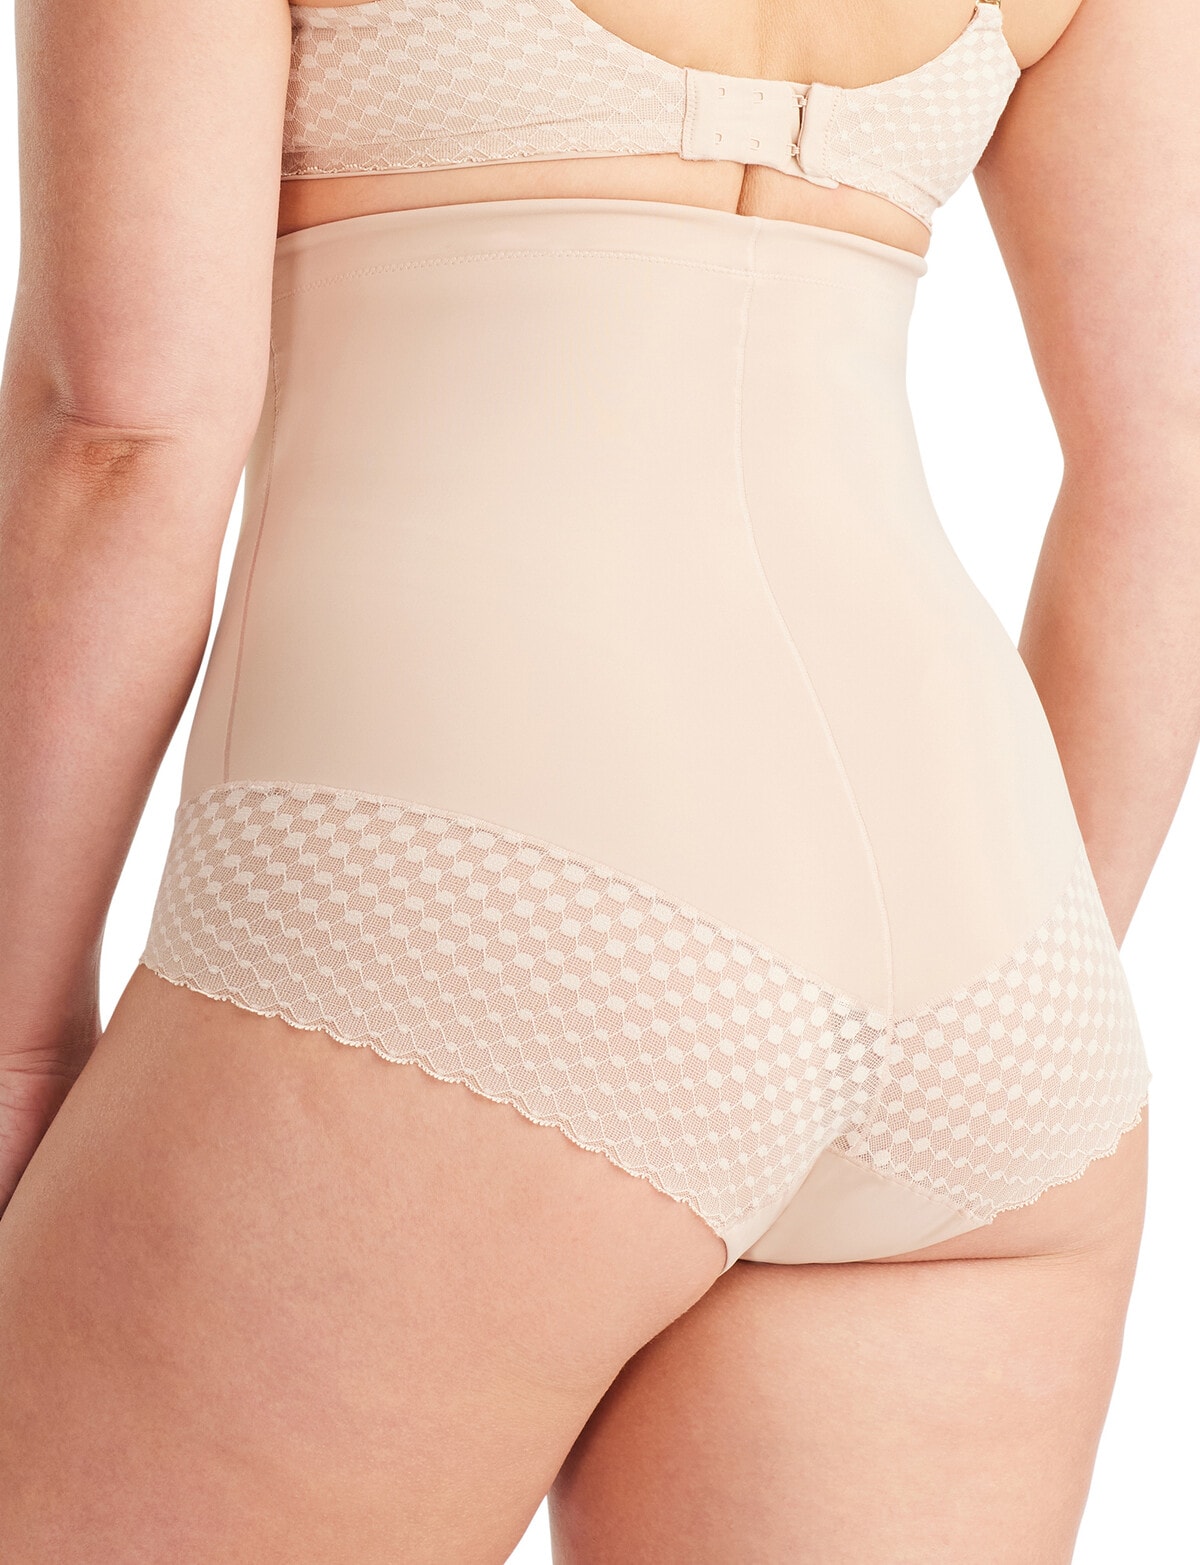 Farmers - Nancy Ganz shapewear is created from the latest fabric